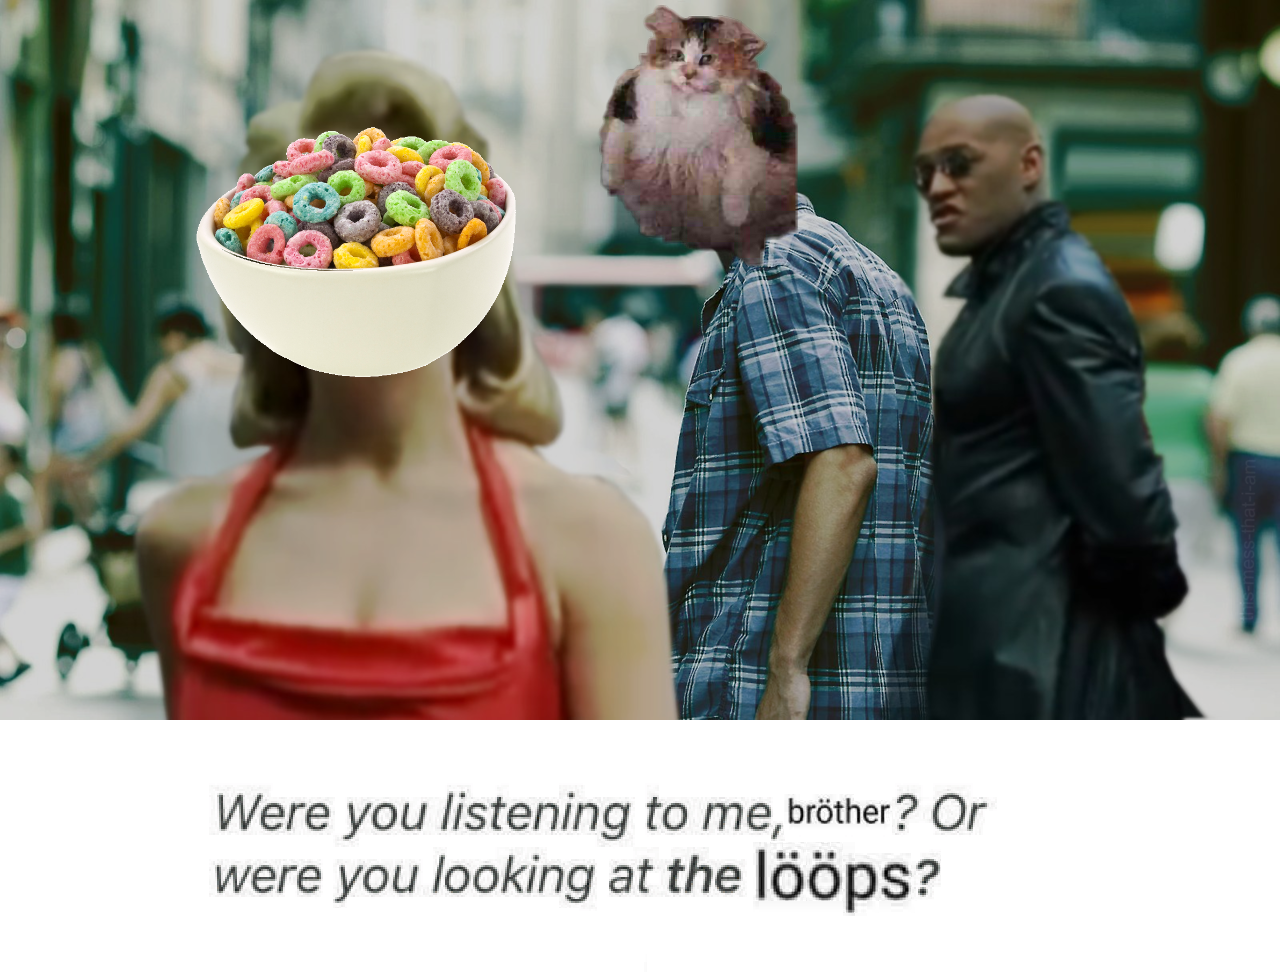 loops cat - were you listening to me neo or were you looking at the woman in the red dress - Were you listening to me, brther ? Or were you looking at th